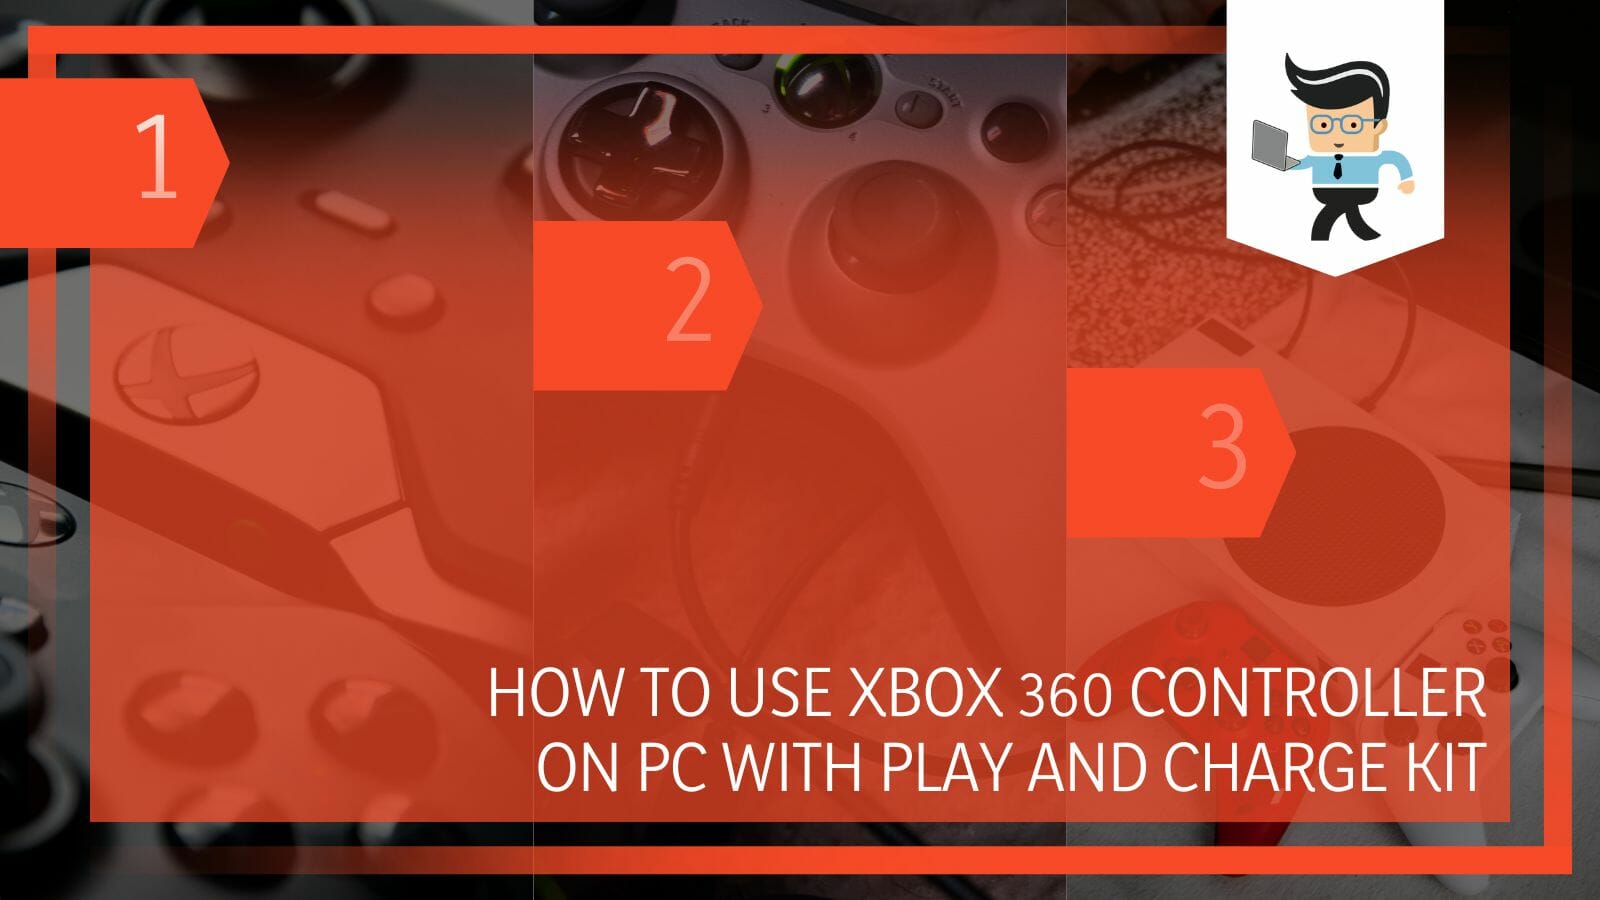 How To Use Xbox 360 Controller on PC With Play and Charge Kit